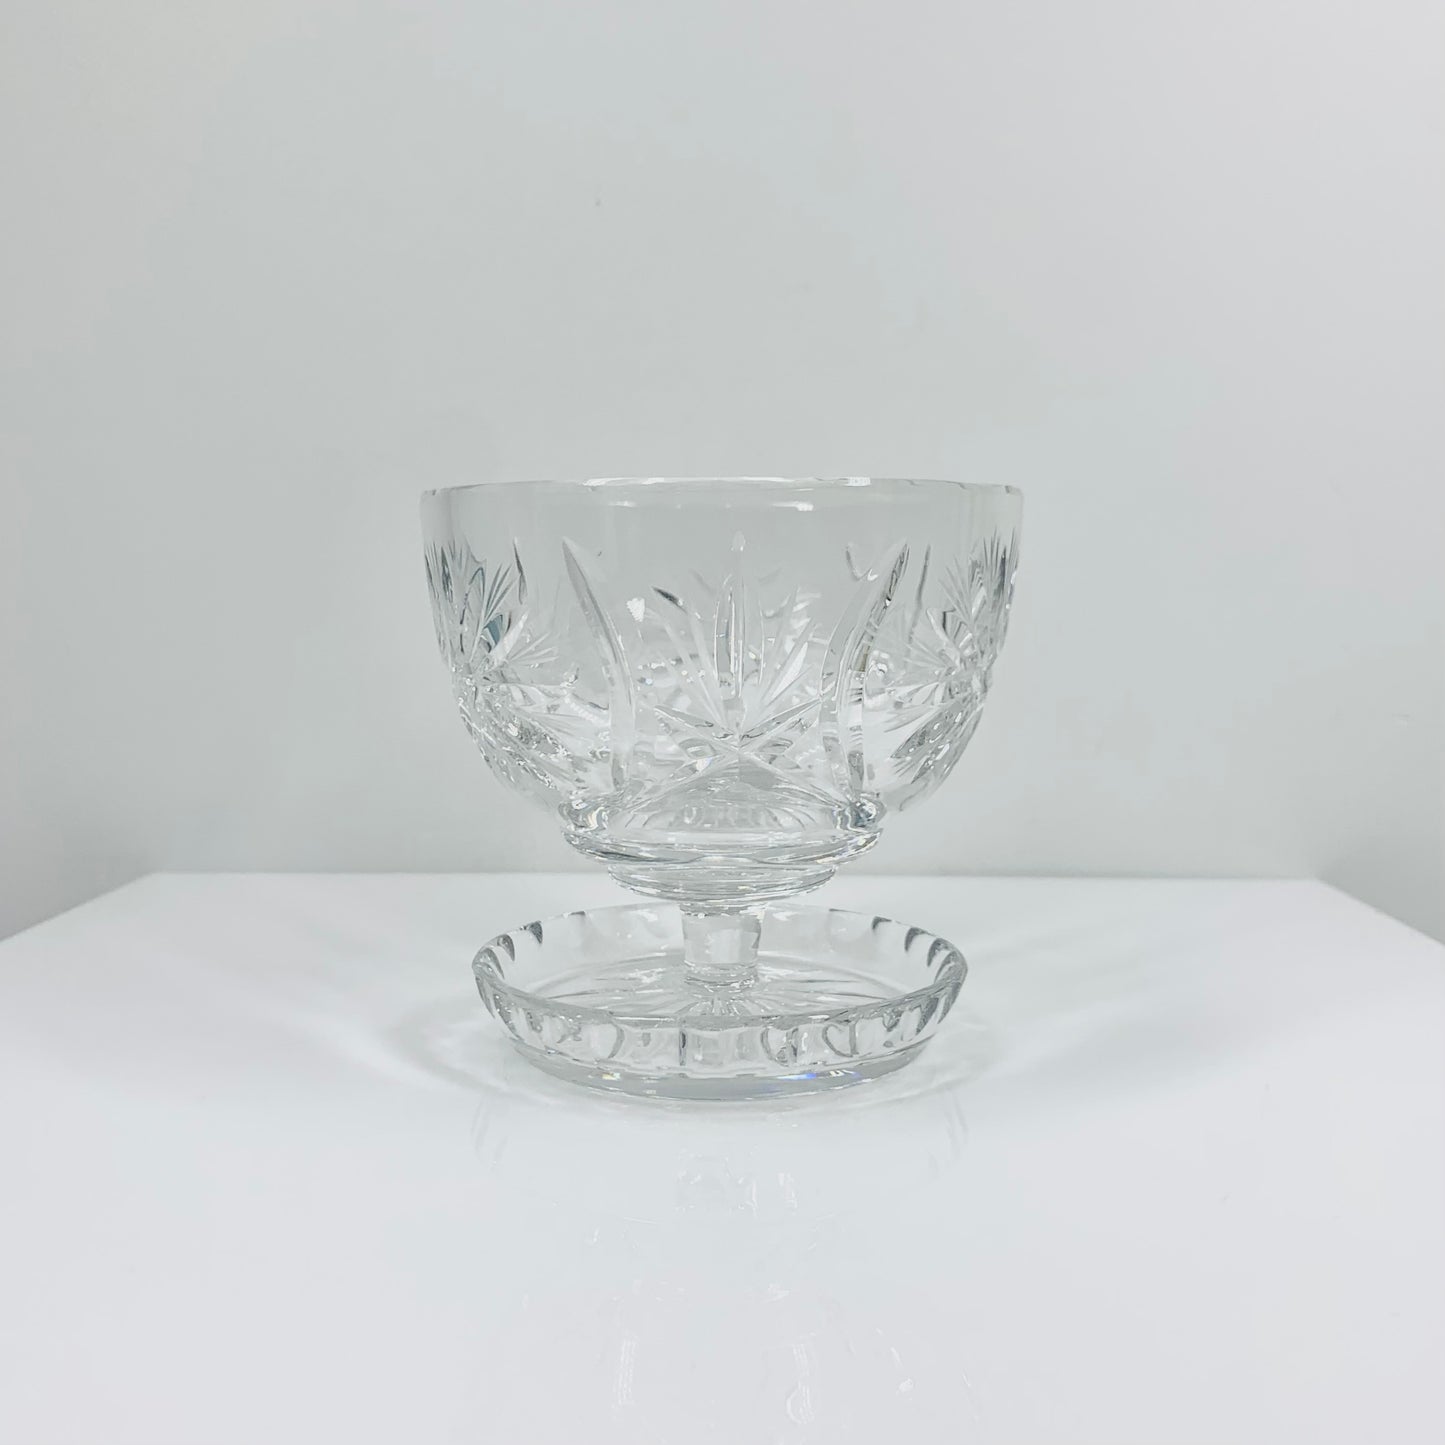 Extremely rare antique American Brilliant era hand crystal dessert coupe